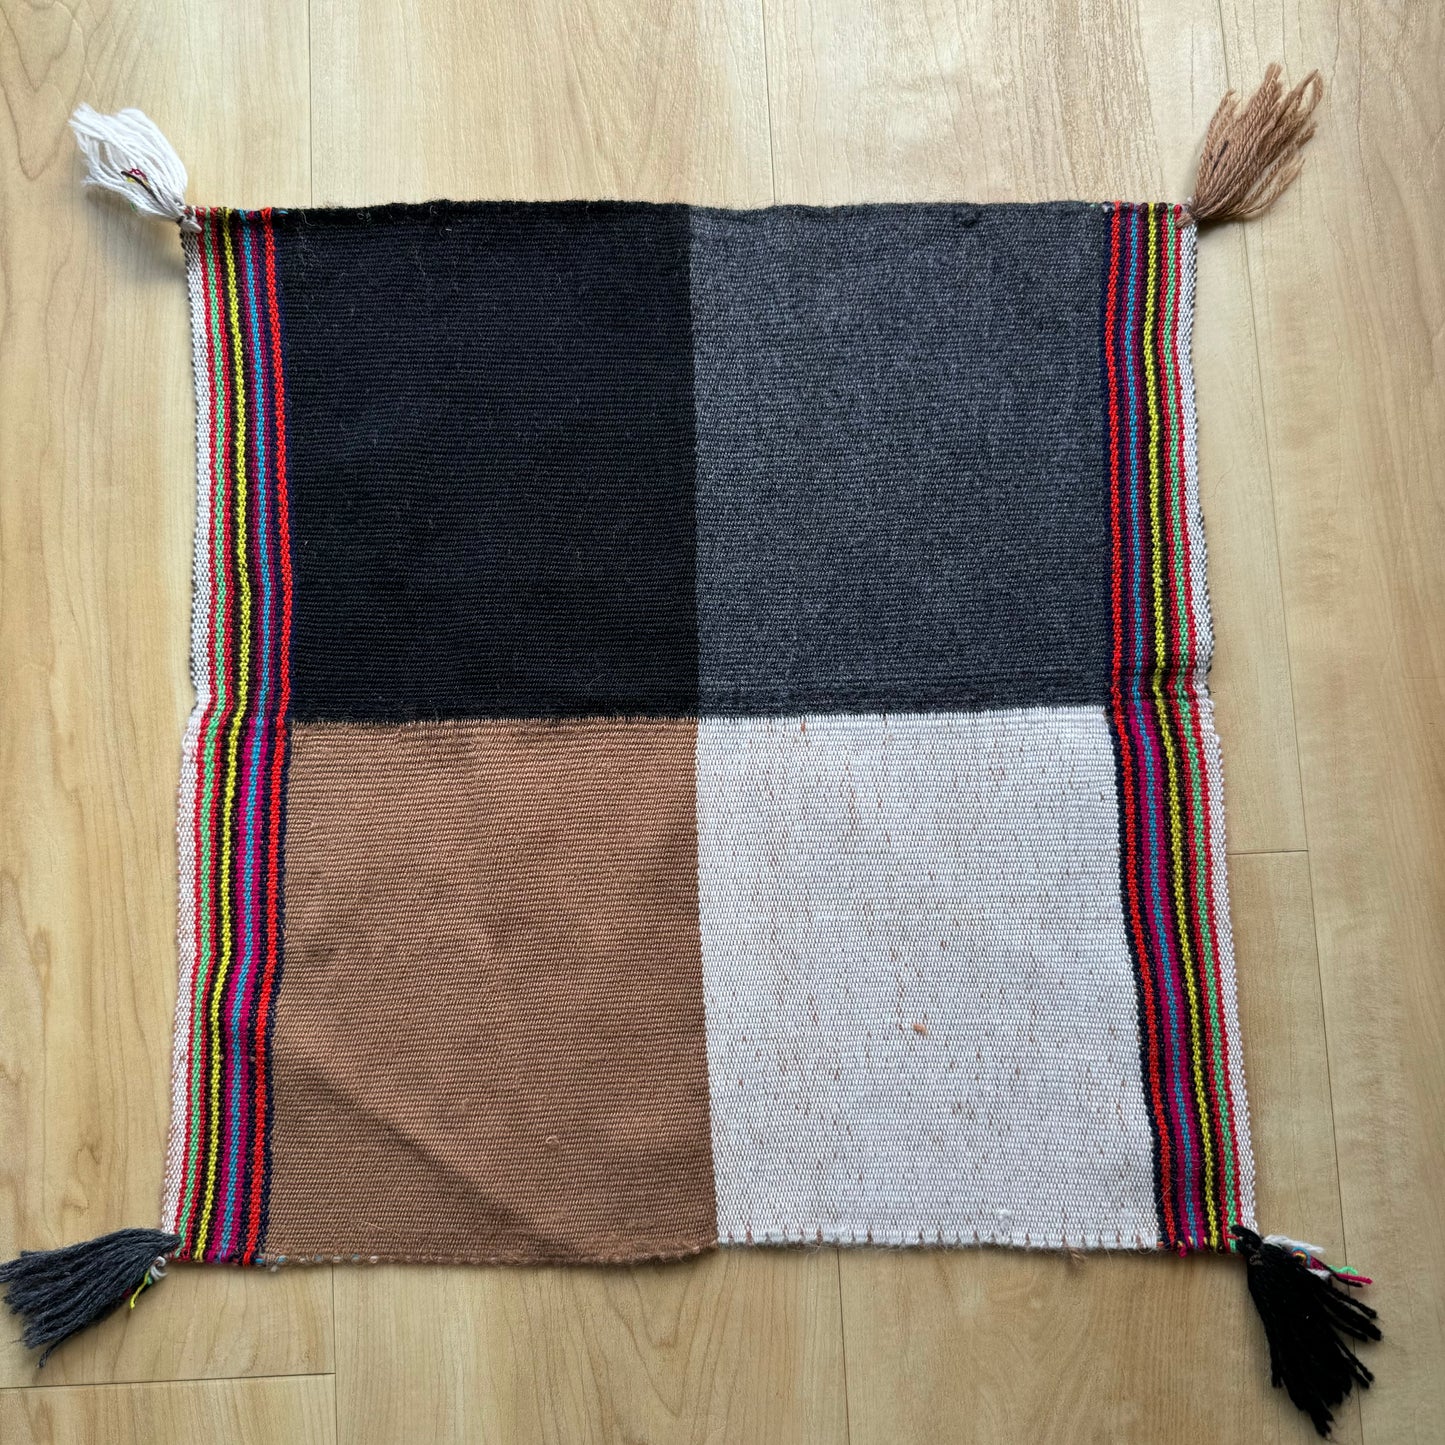 Sacred Tawa cloth from the High Andes. Hand woven from hand dyed Alpaca wool in a variety of colors. Cloth can be used for your work with the Mesa, Sacred Medicine bundle, and/or as an Altar cloth.